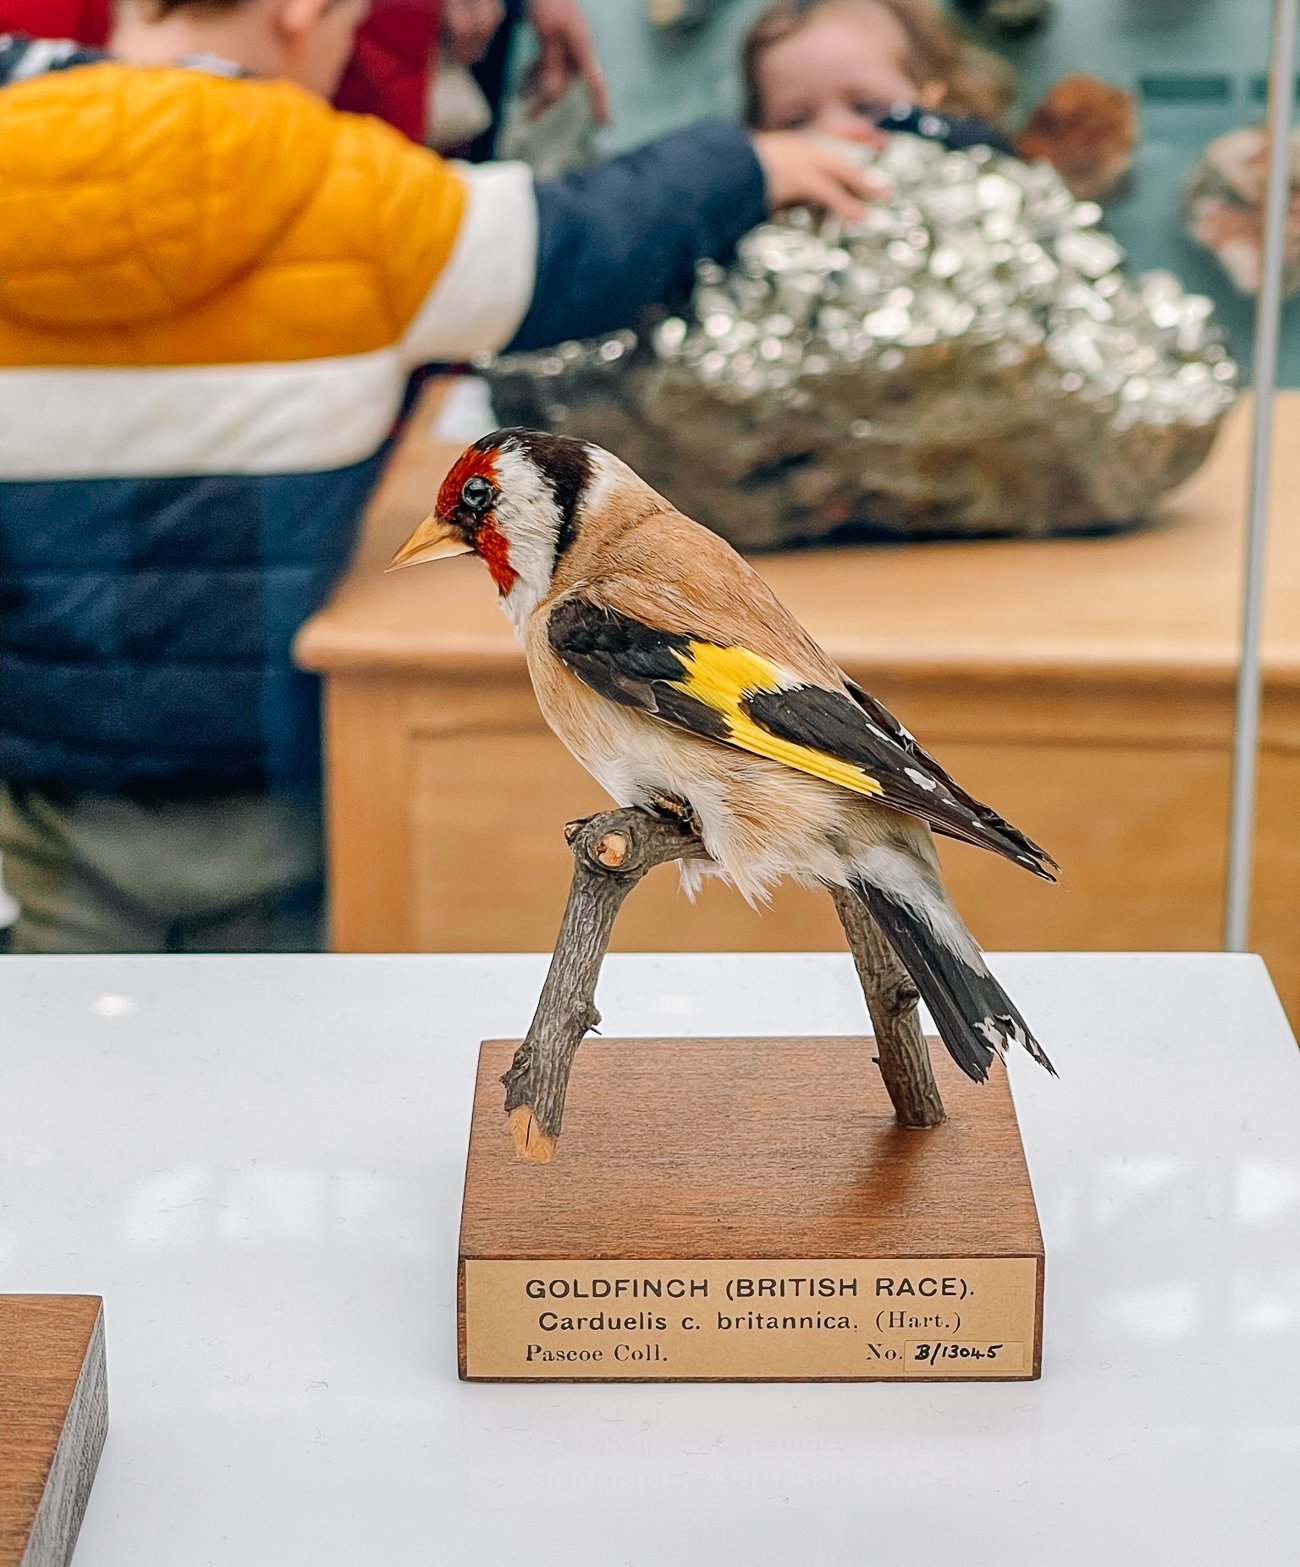 British gold finch at the Oxford Museum of Natural History